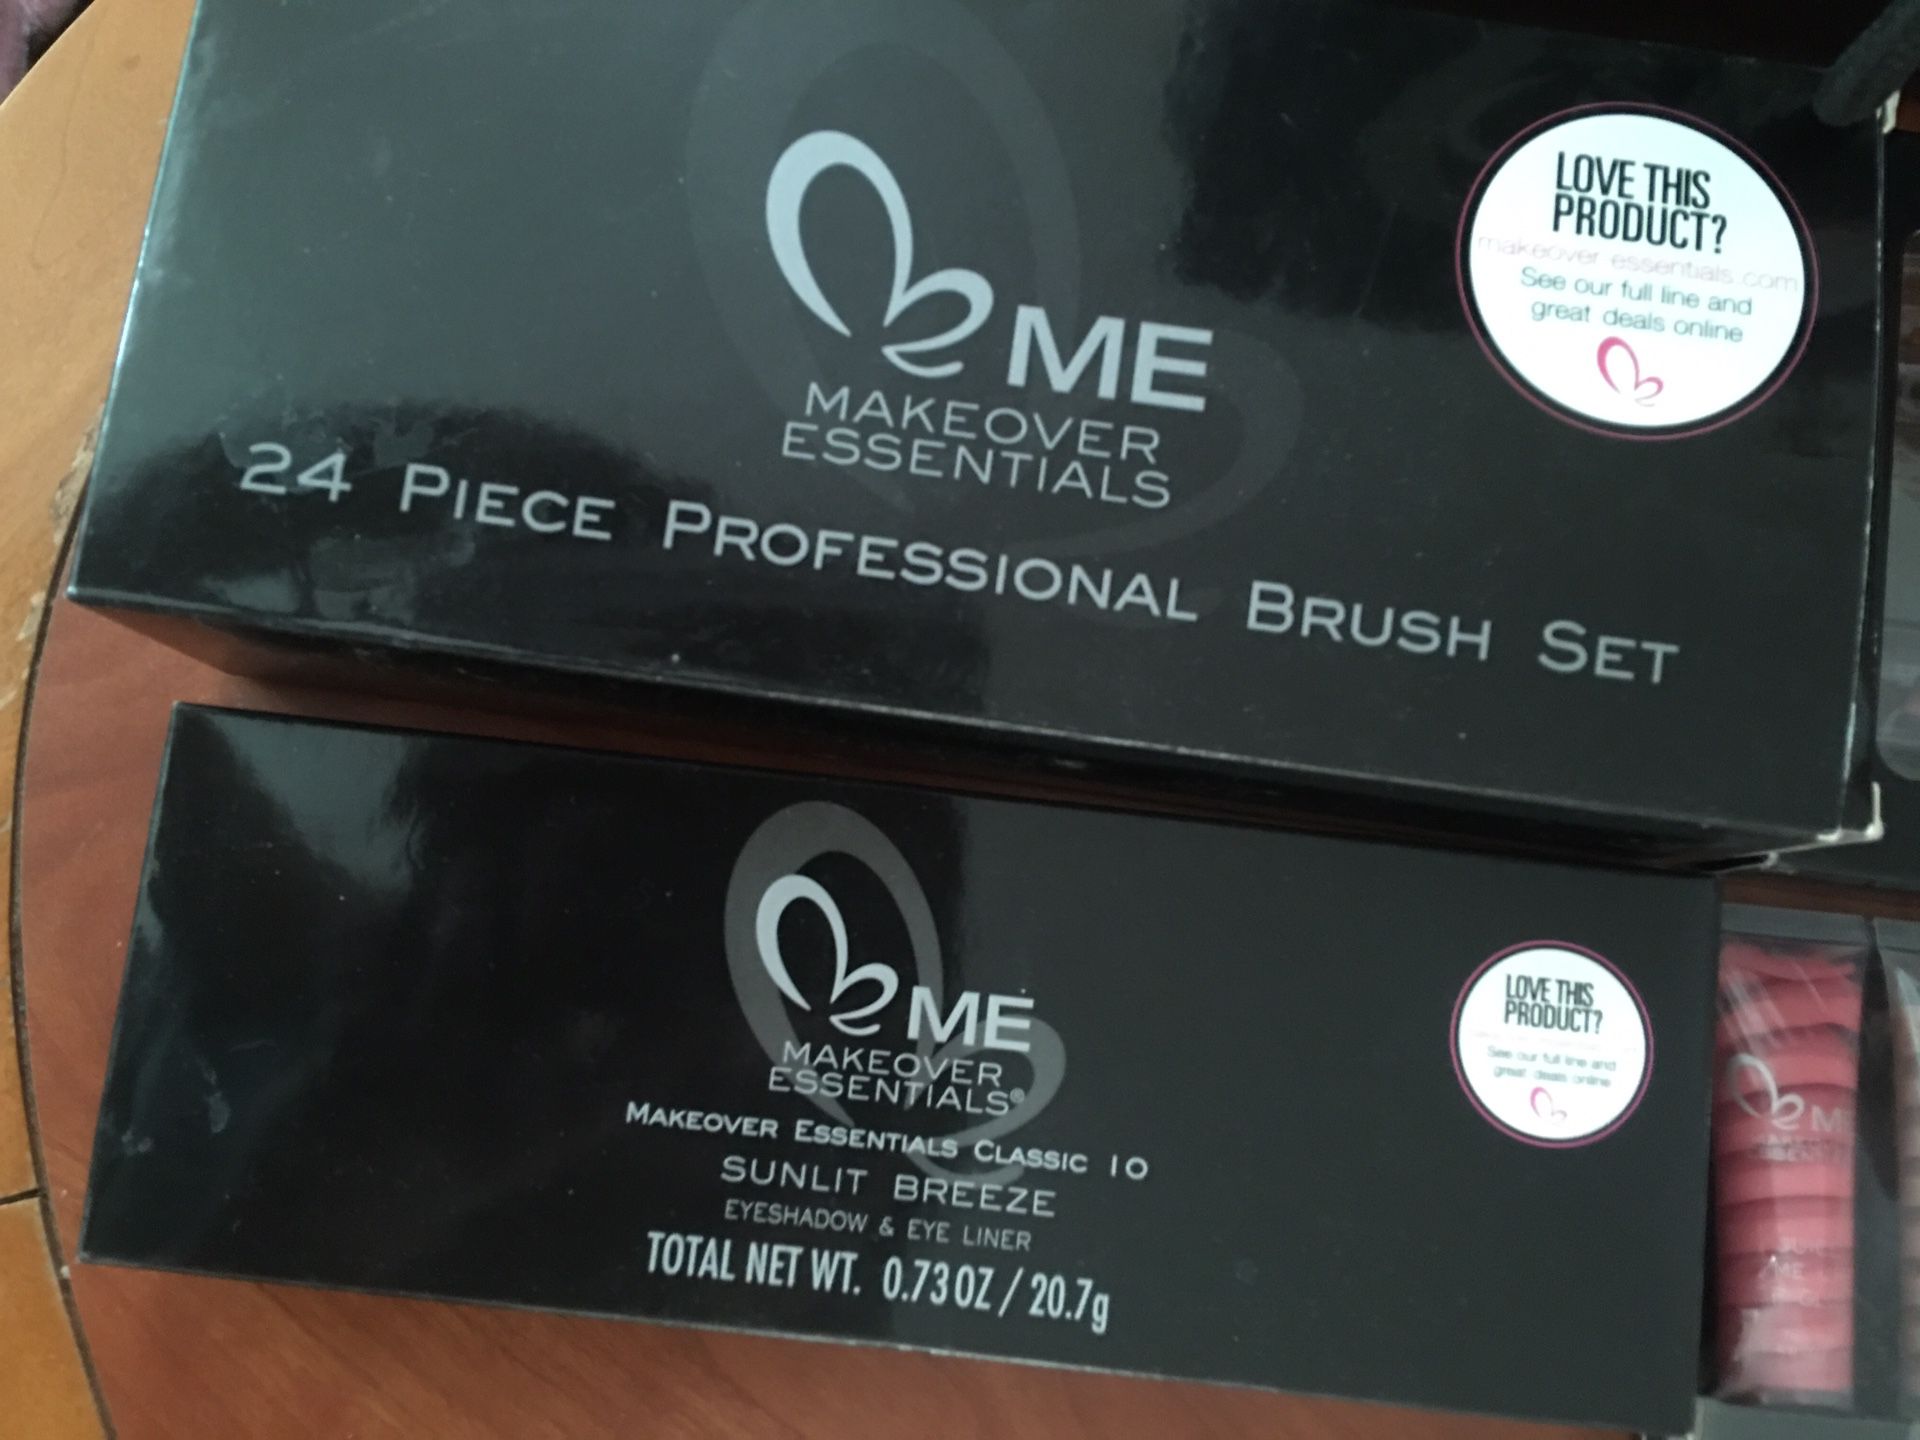 Makeover Essentials makeup and brushes